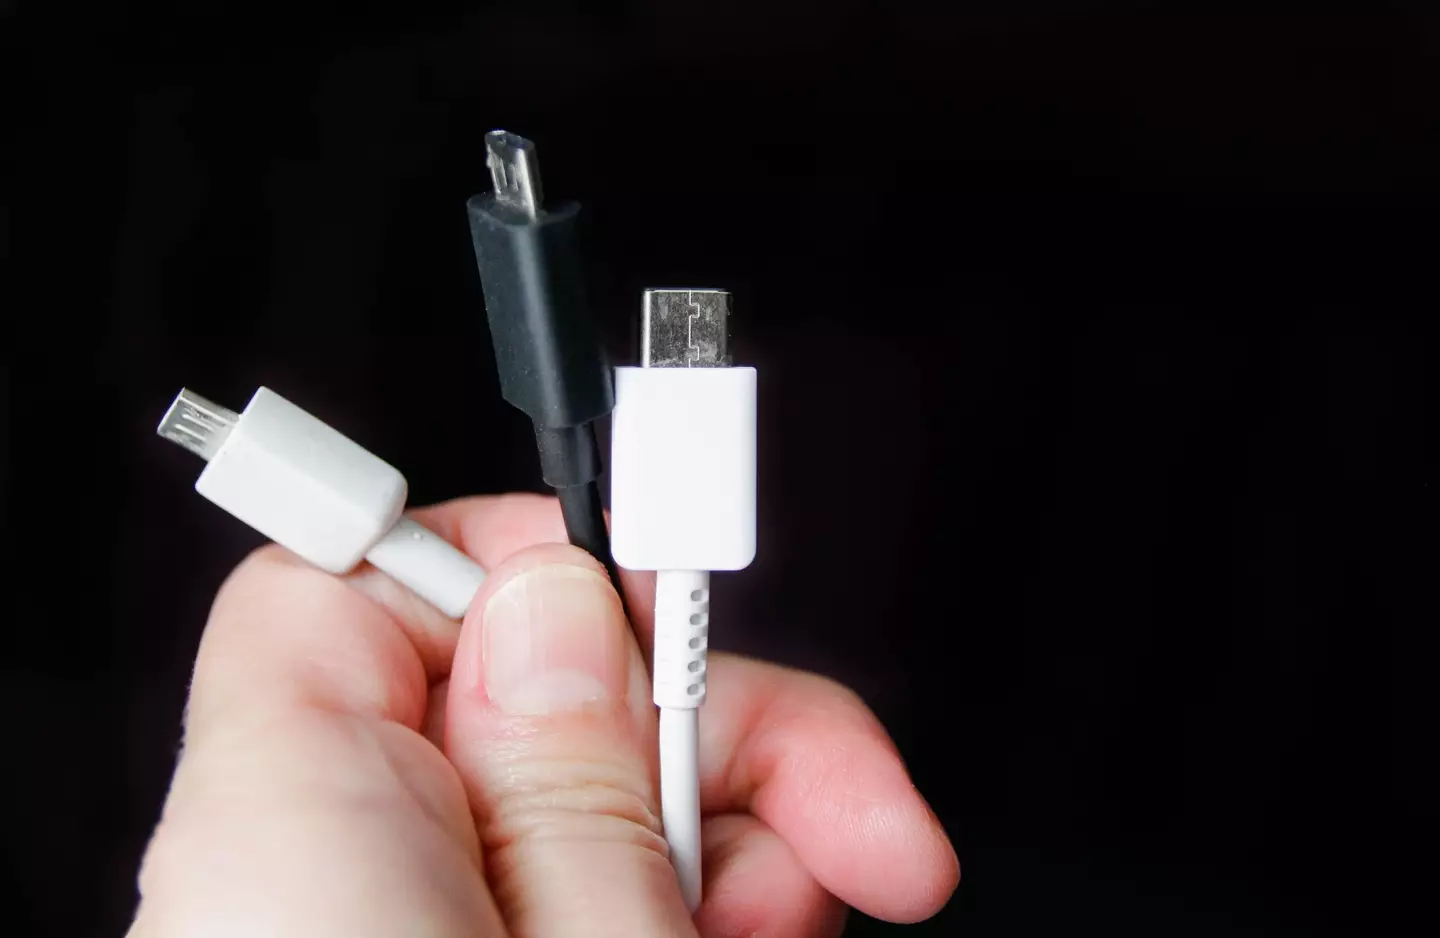 Apple previously confirmed that the iPhone 15 will have a USB-C port.